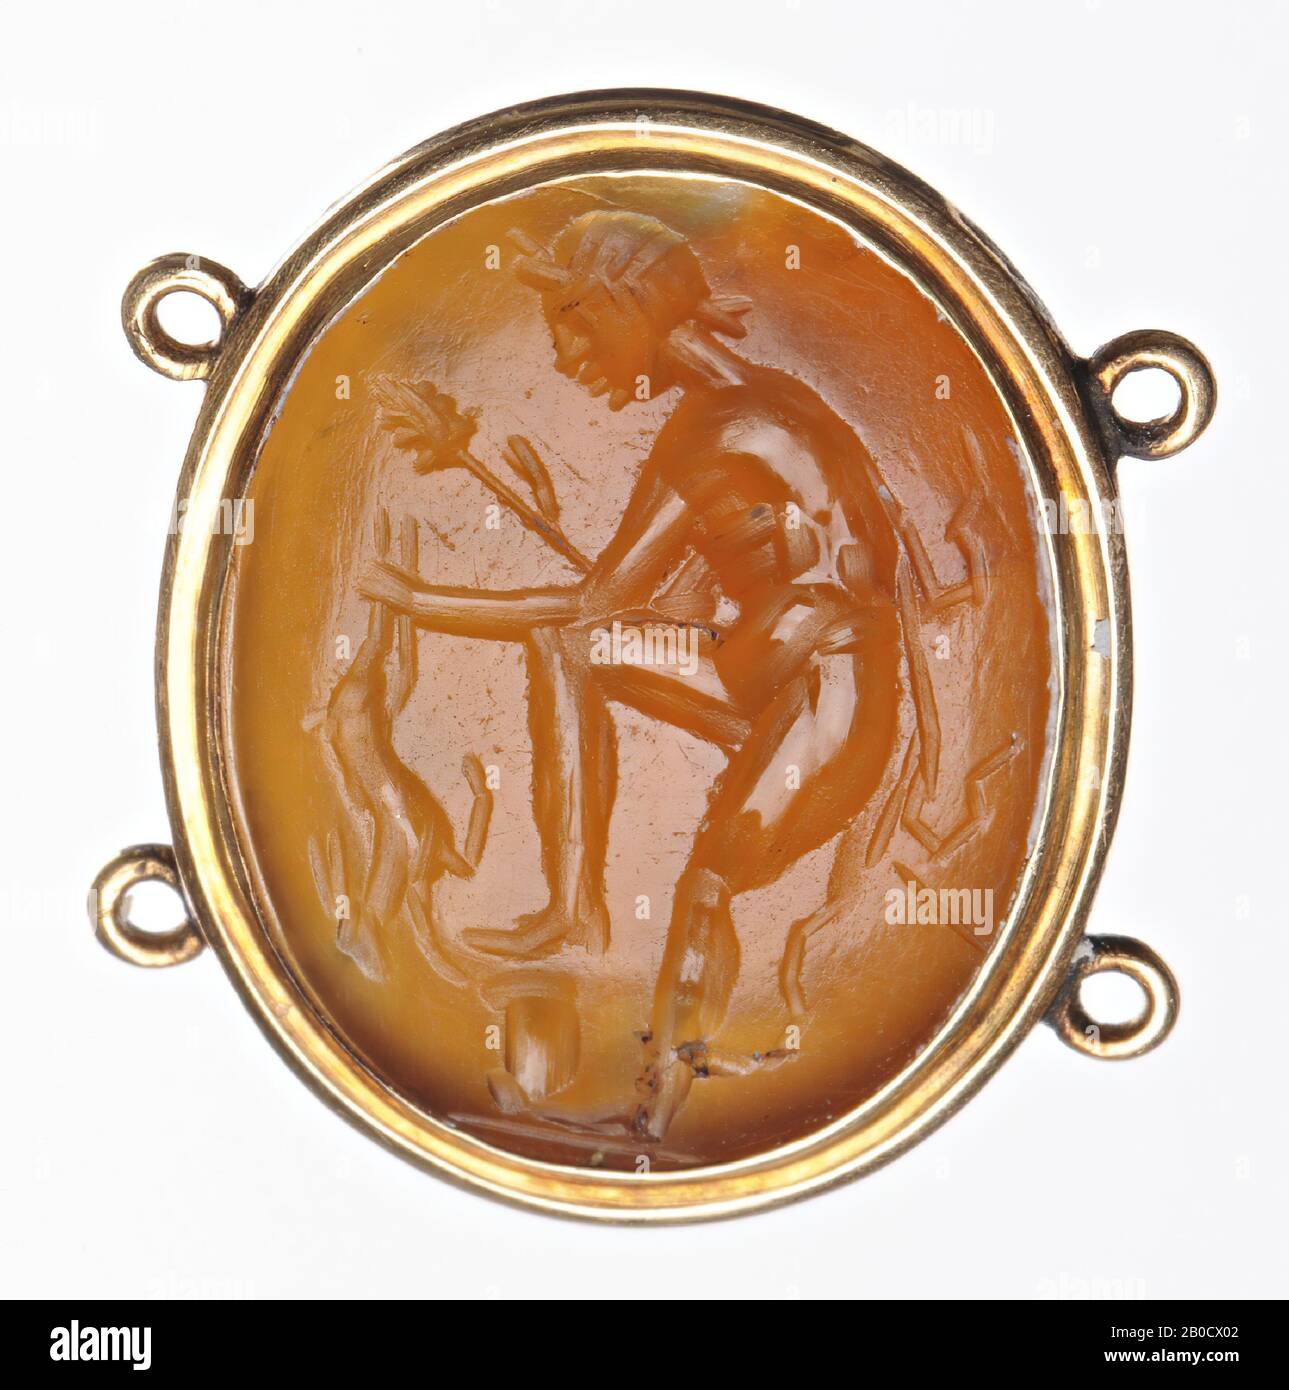 Vz: the satyr places his right leg on a cylindrical object, with his left hand he has a dead hare attached to his hind legs, in his right hand he has a thyrsos with taeniae., Gem, intaglio, ringstone, carnelian, Color : orange-red, Shape: oval, Edited: Maaskant-Kleibrink, M., Catalog of the engraved gems in the Royal Coin Cabinet, 1978, p.60, fig.2, type F1A, in modern gold setting, Method: body modeling with large rounded drill, detailin, 16.5 x 12 mm, D. 2.5 mm, 2nd half 1st century BC. -50 Stock Photo